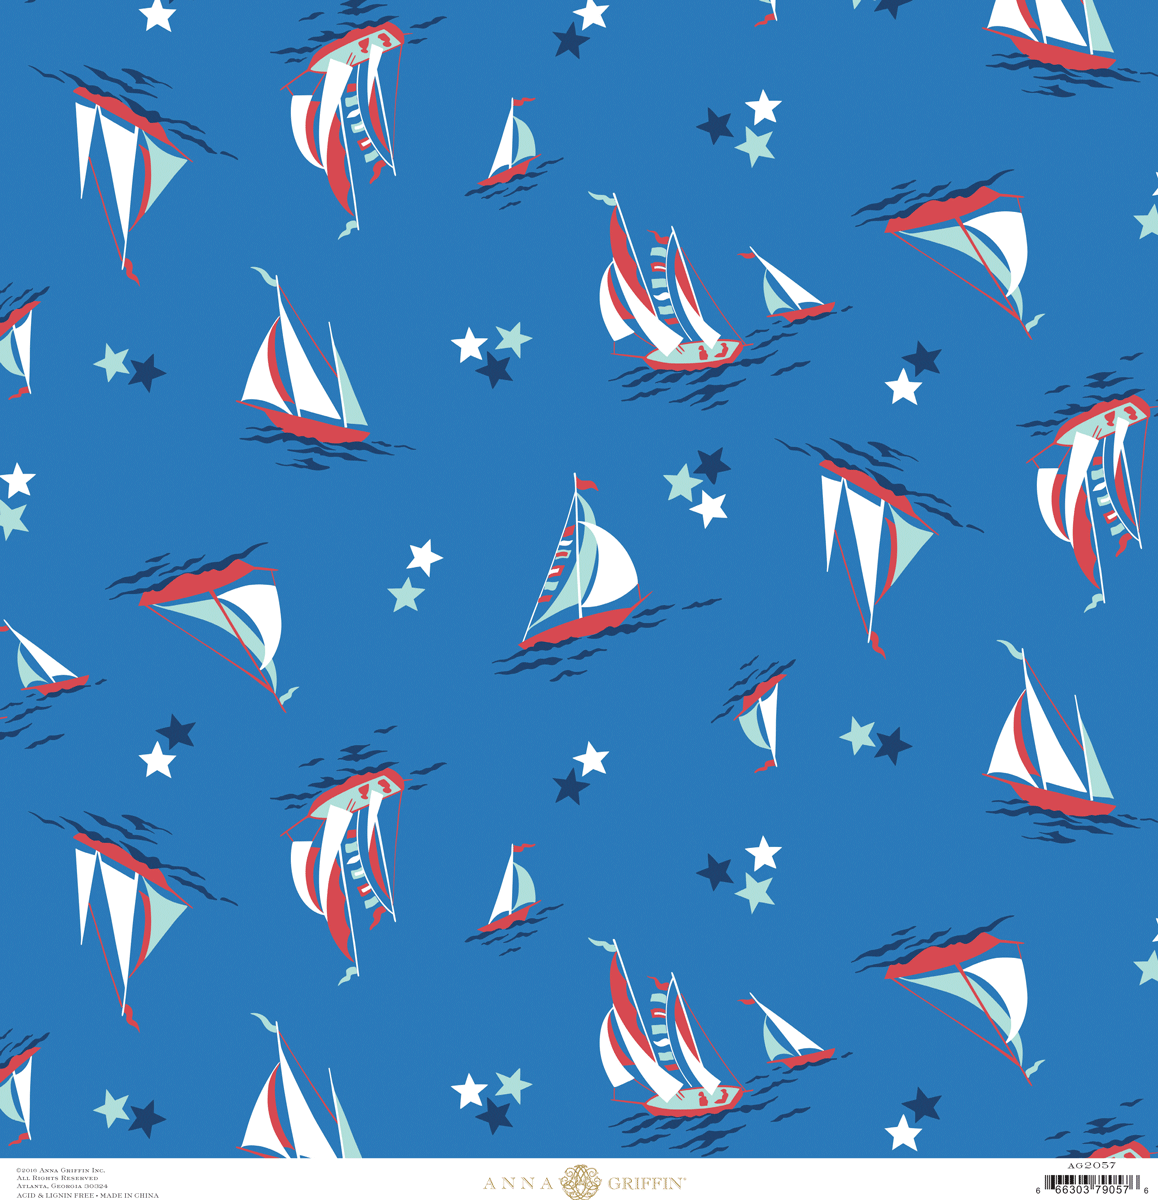 a pattern of sailboats and stars on a blue background.